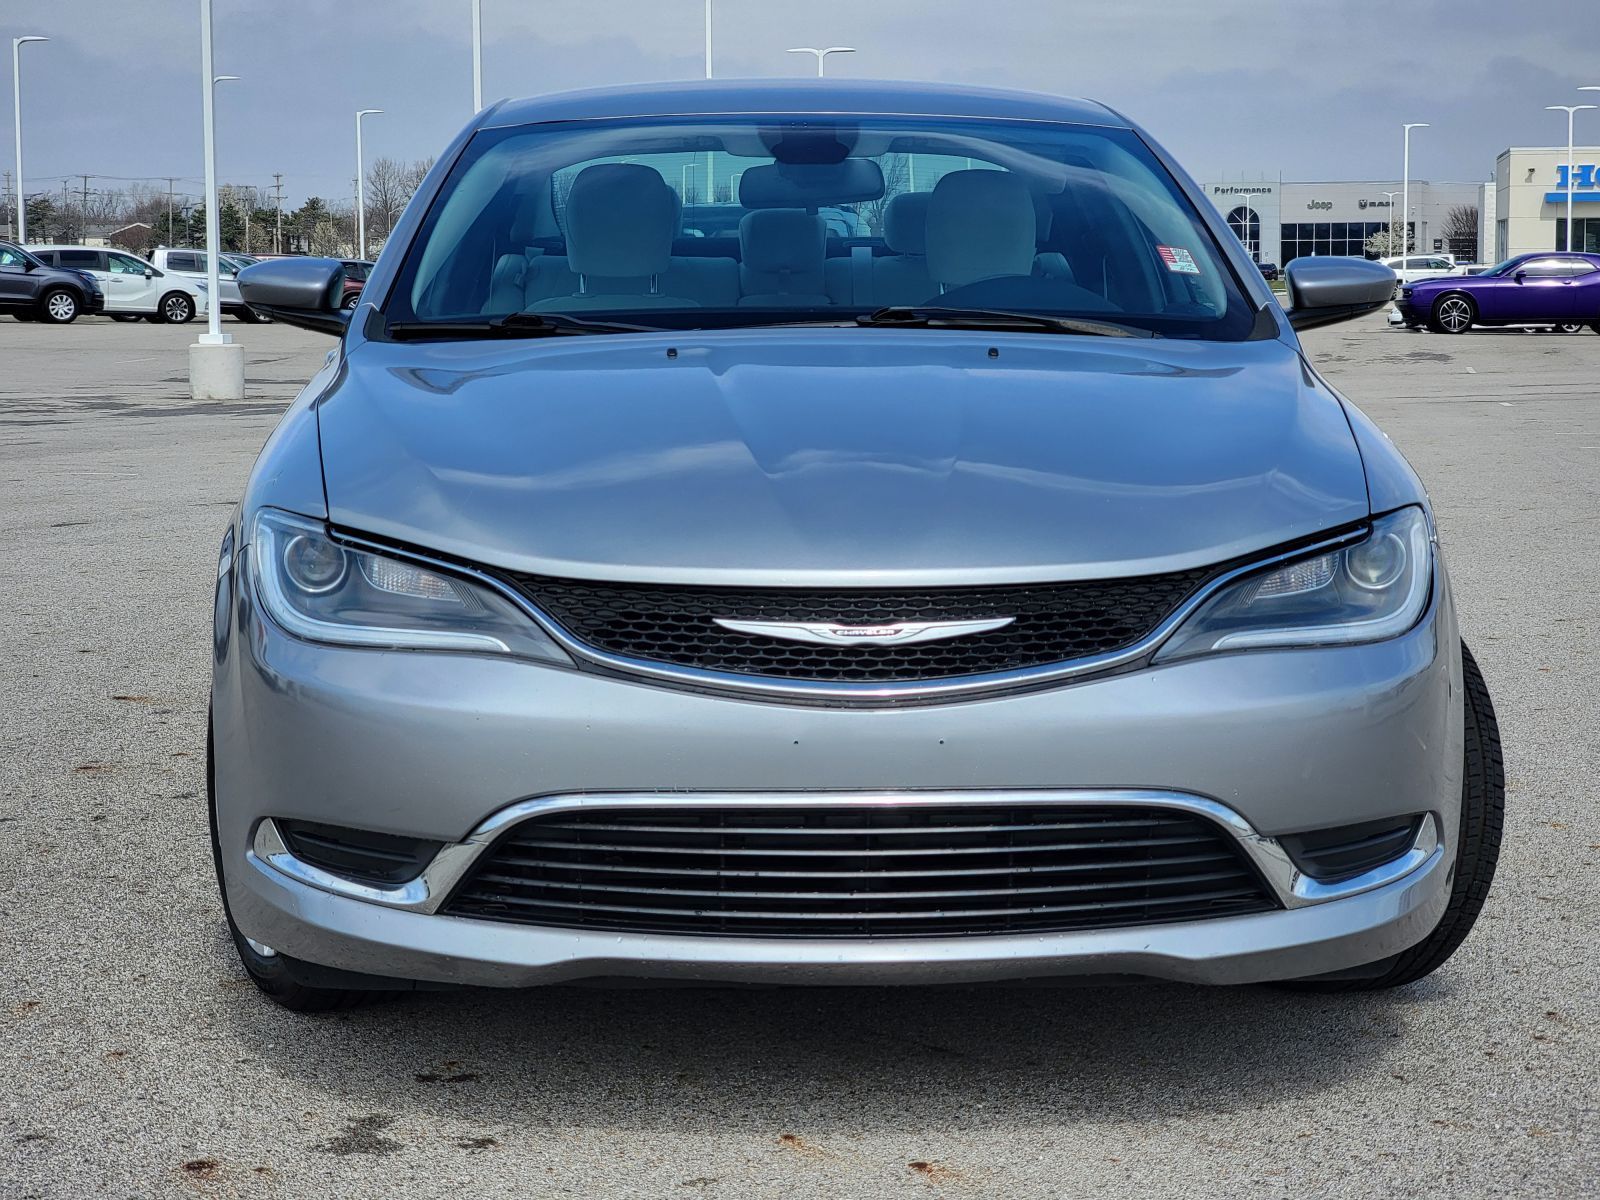 Used, 2015 Chrysler 200 Limited, Silver, P0499-7